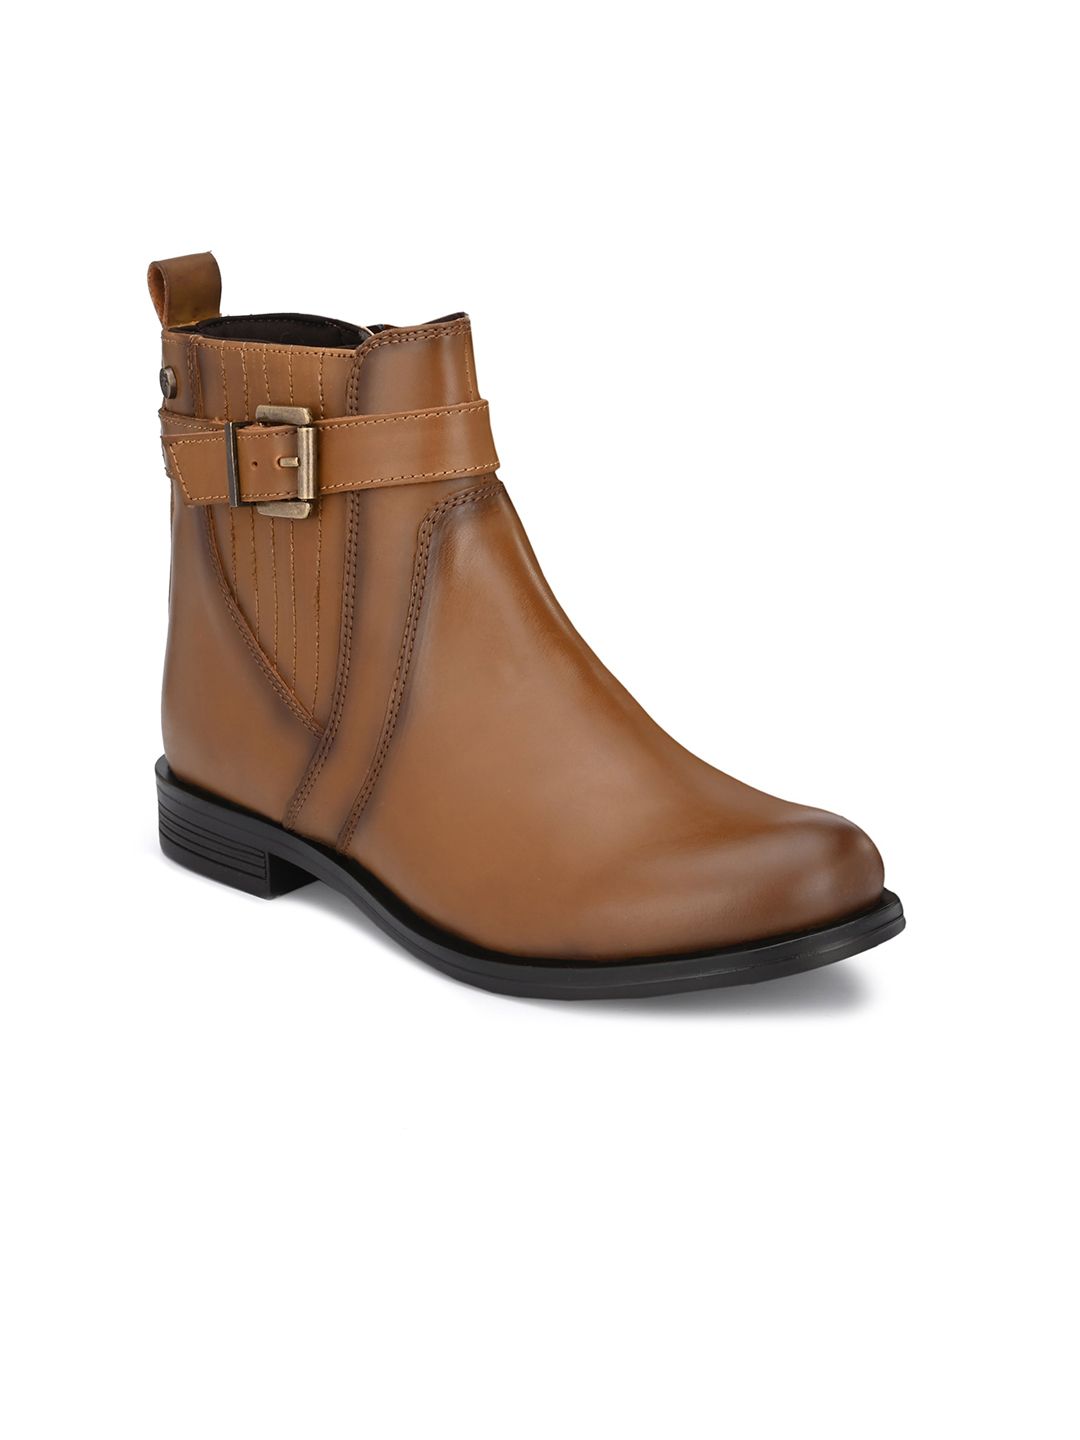 Delize Tan Block Heeled Boots with Buckles Price in India